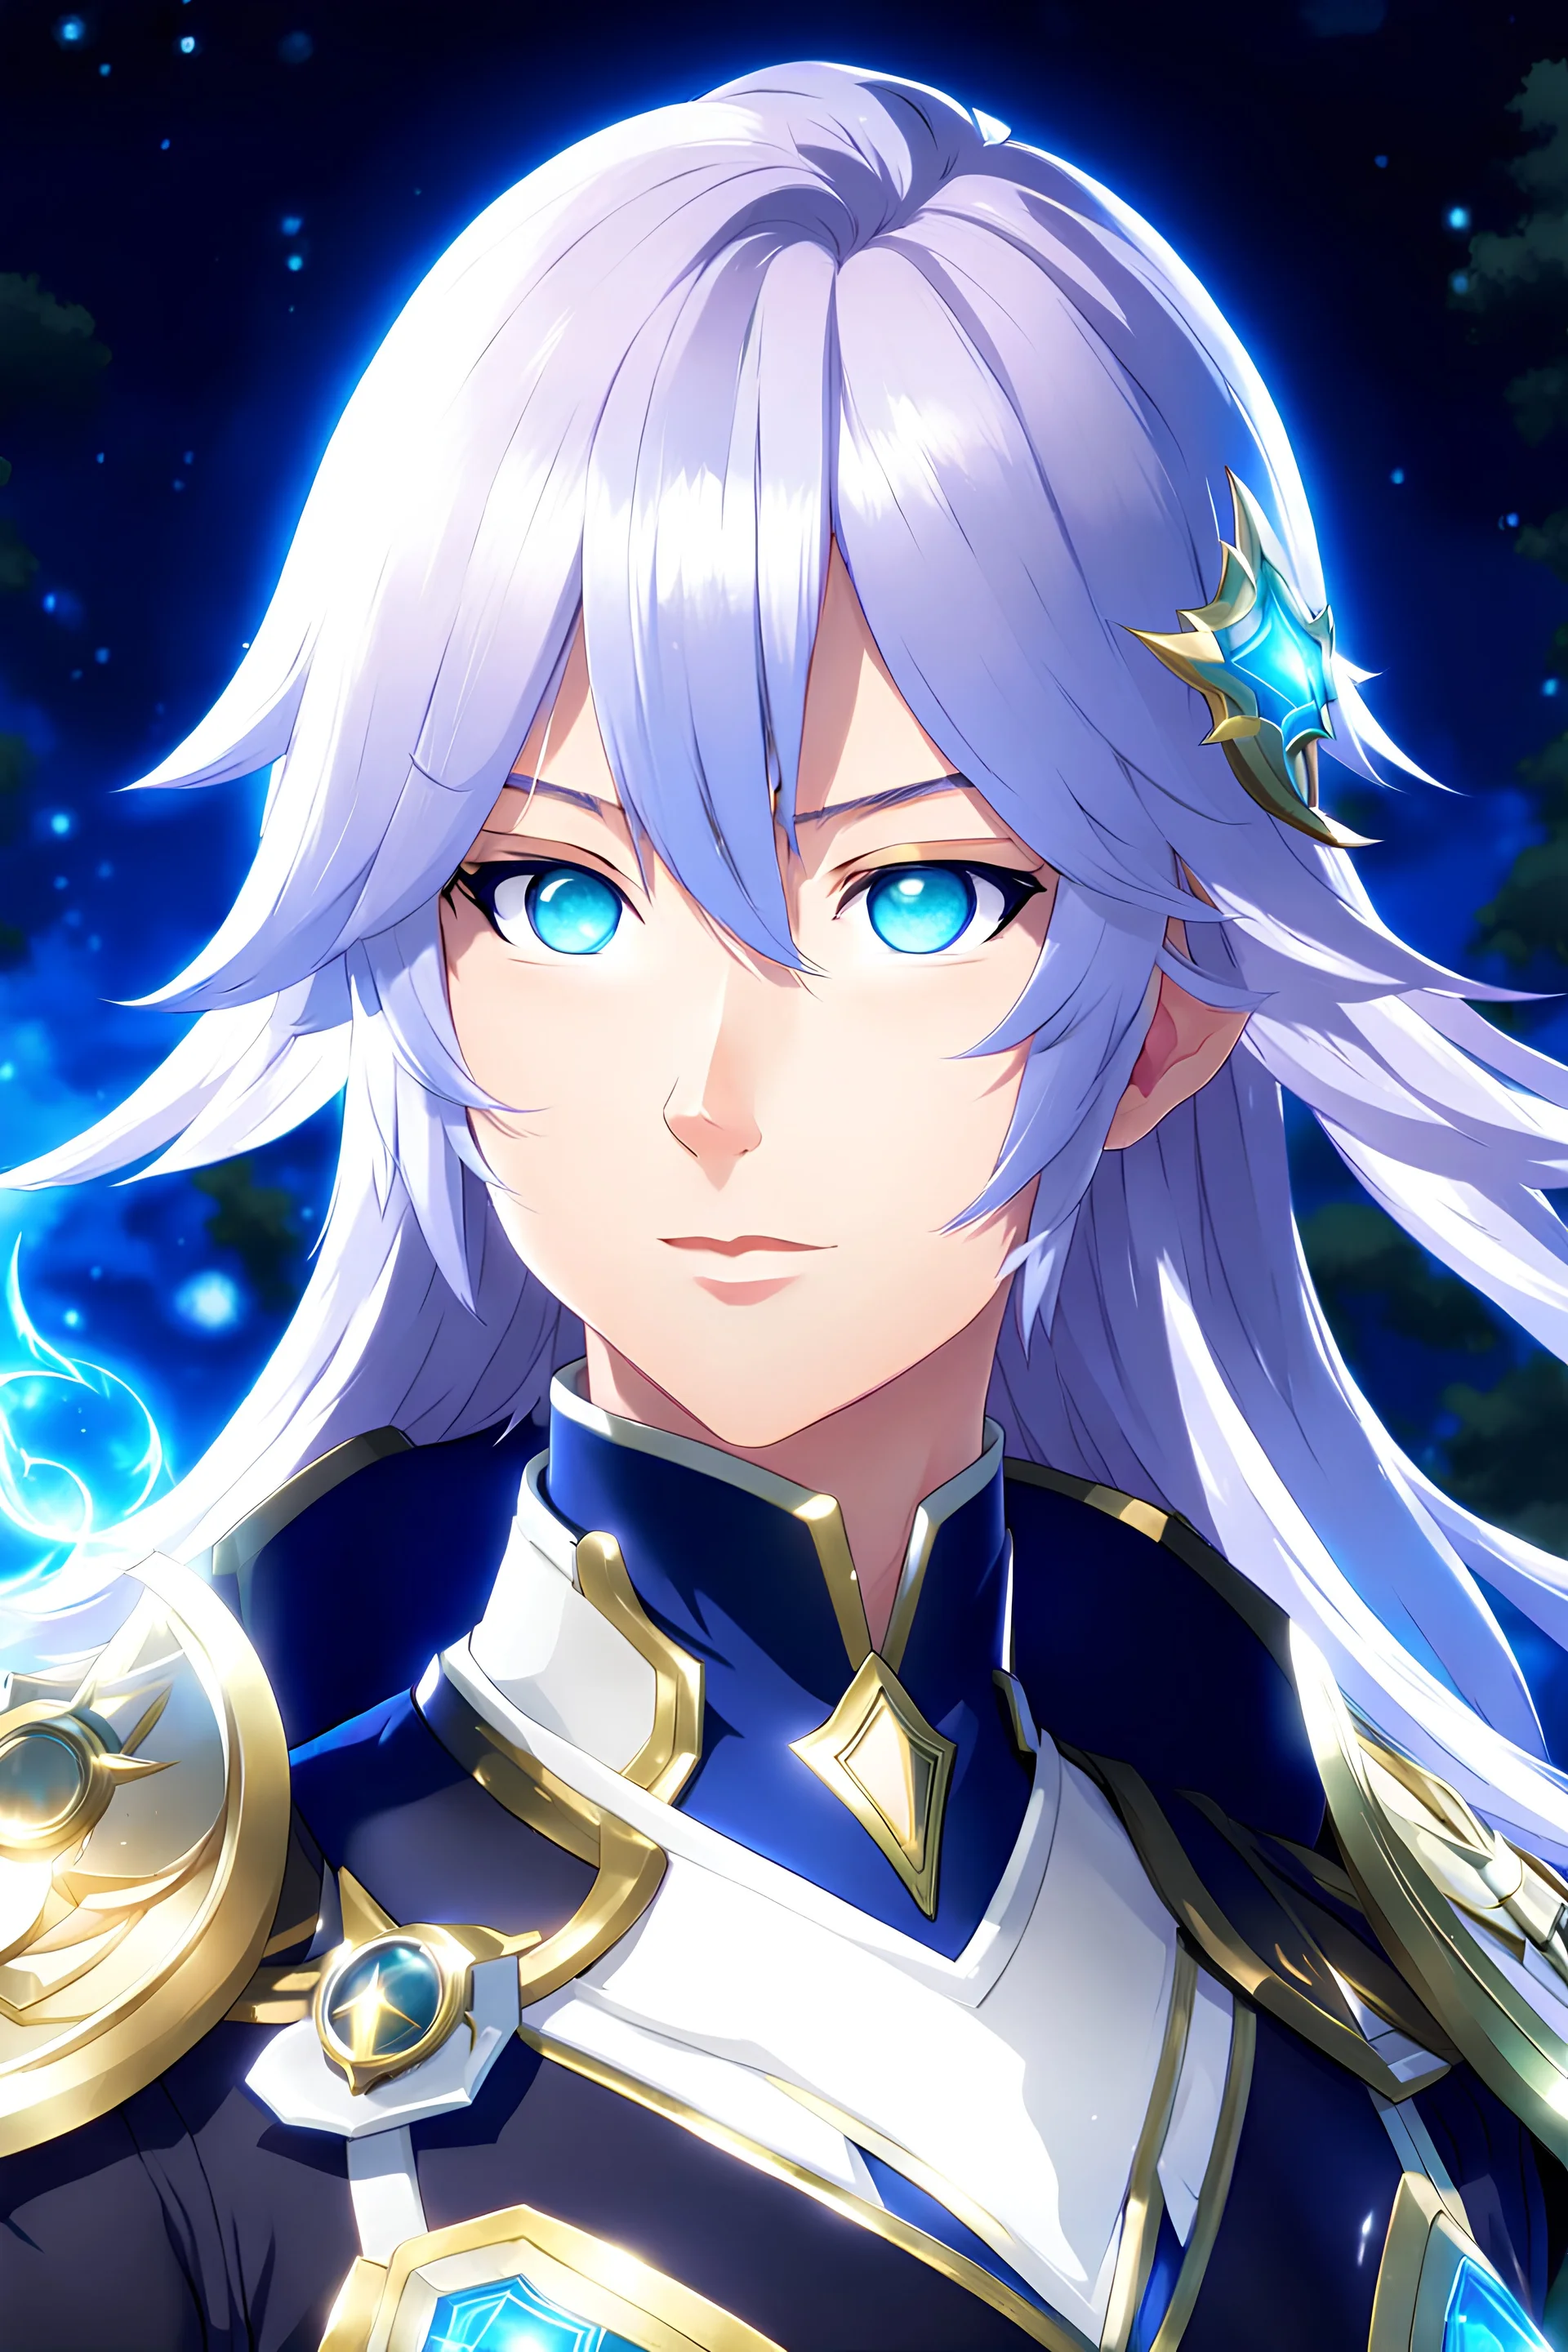 Portrait of Aether from Genshin impact.